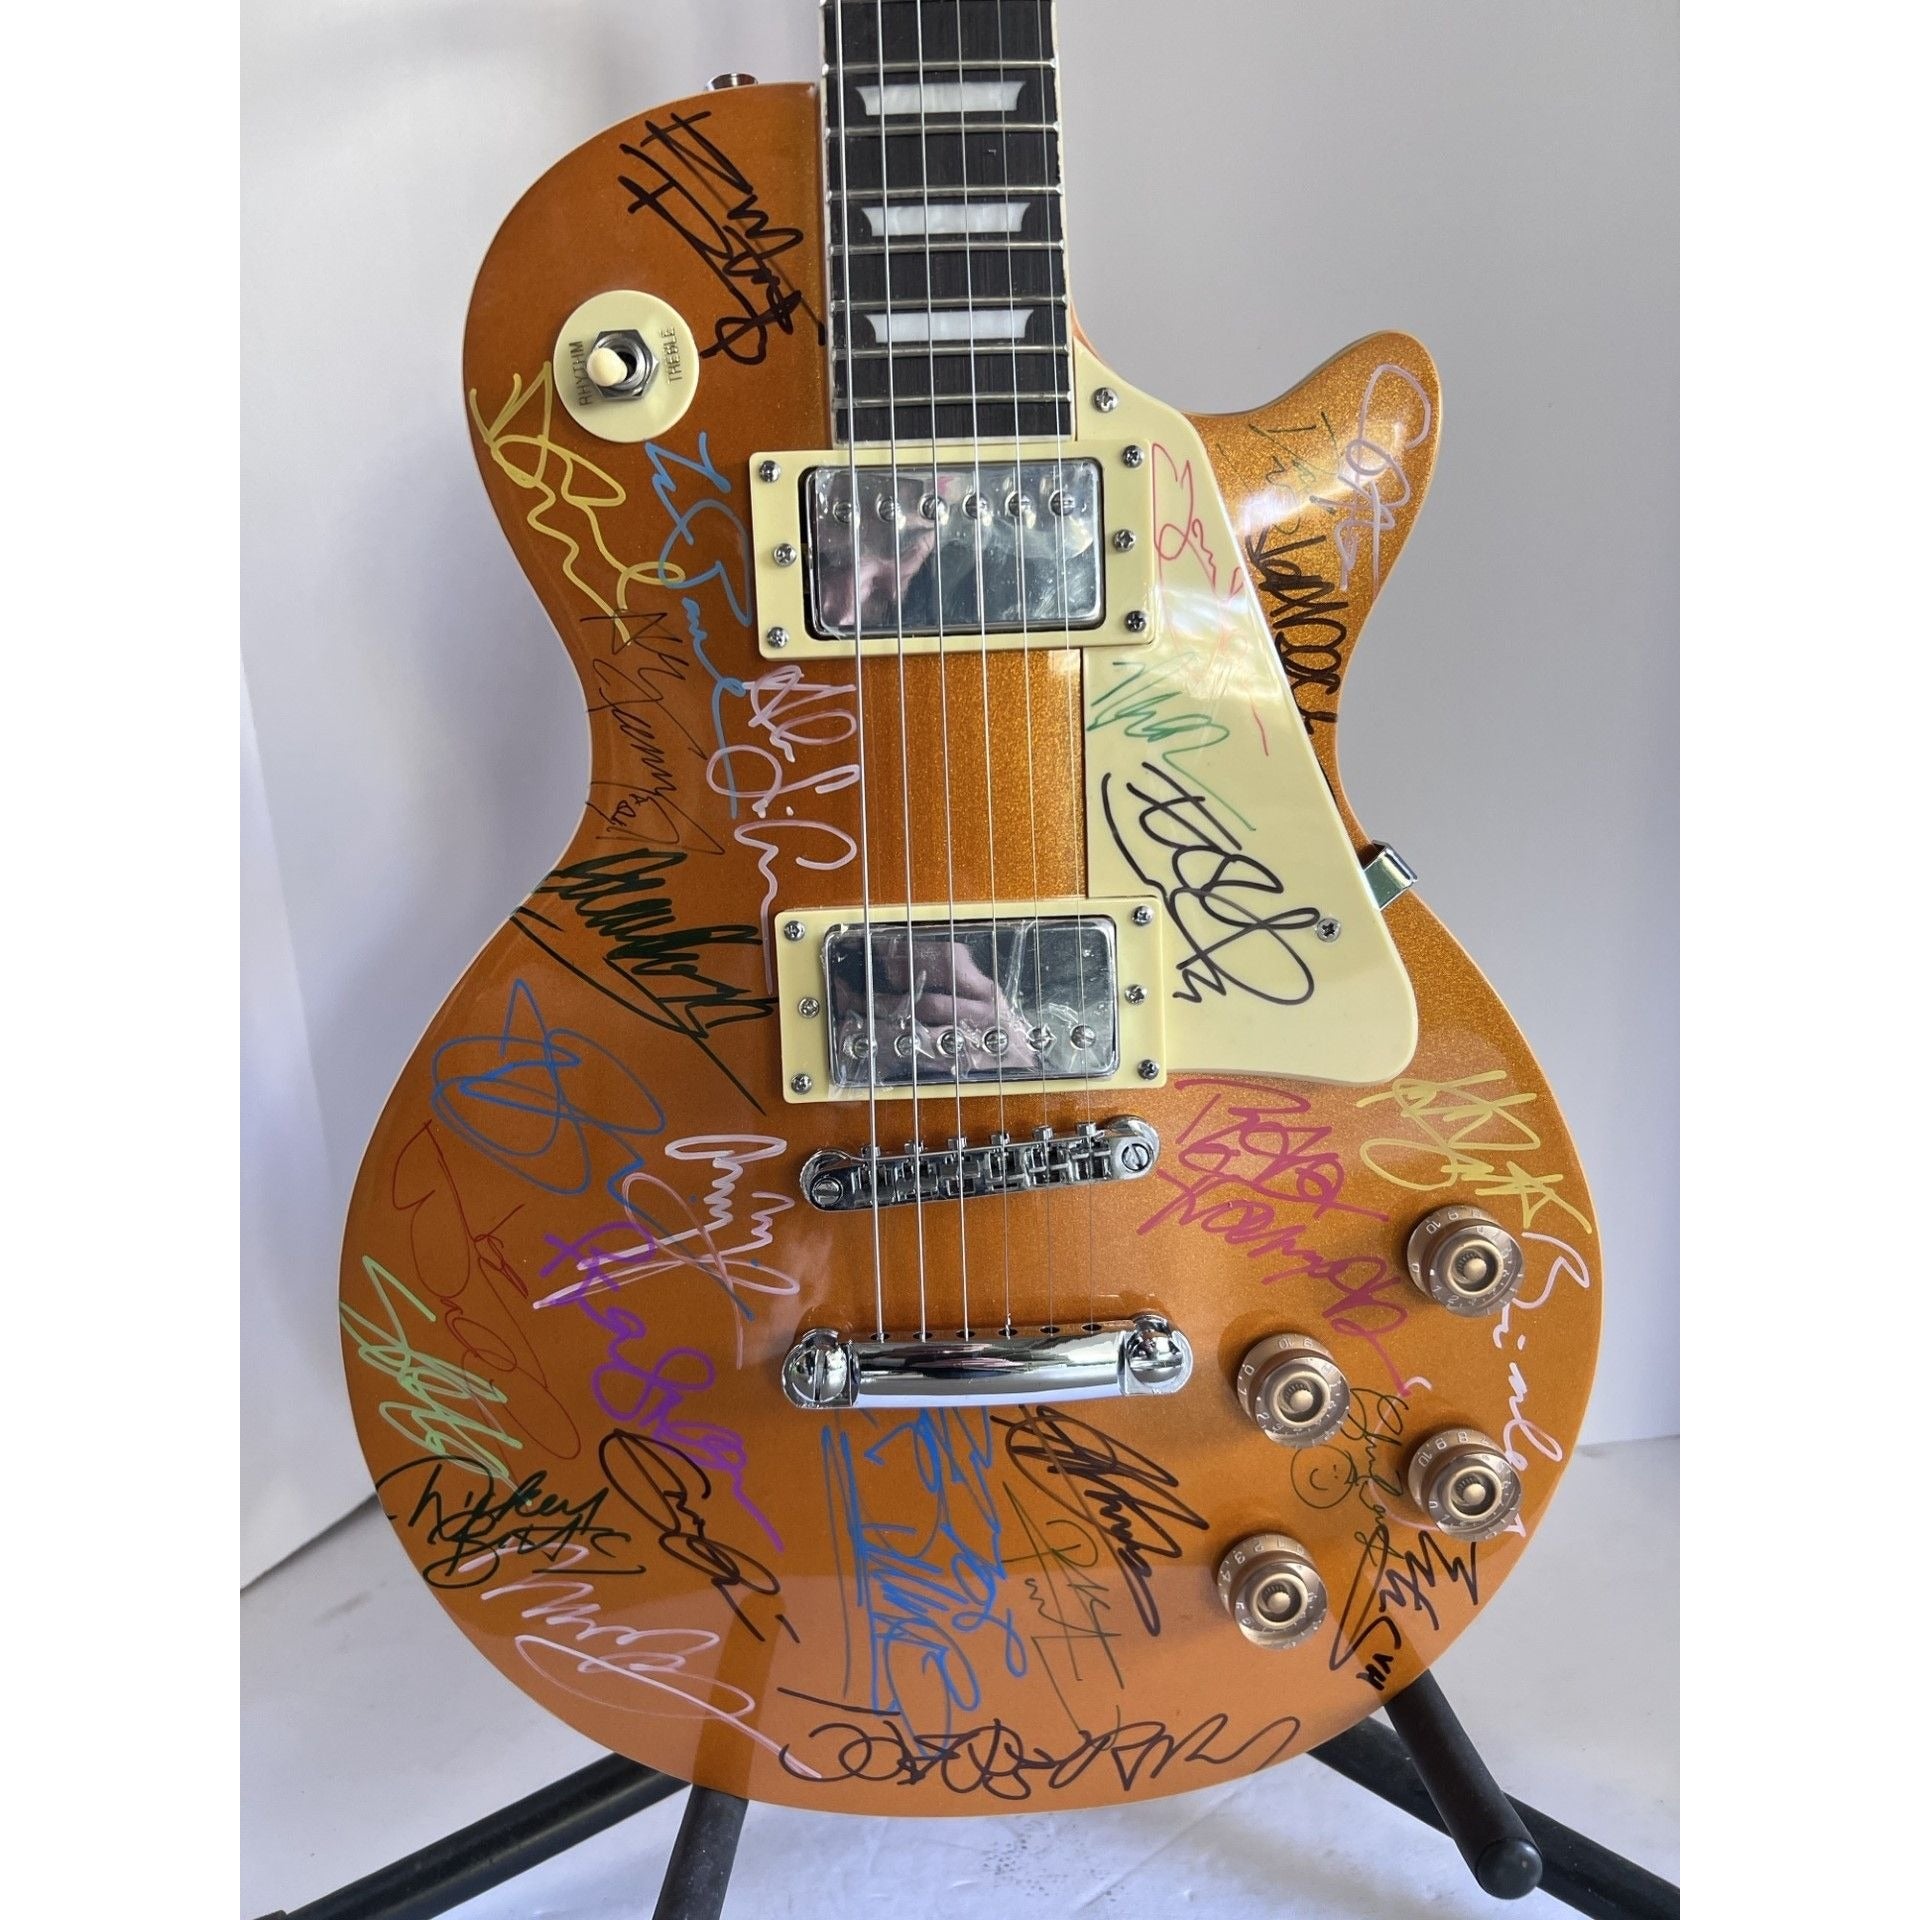 Rocks Greatest Guitarists Eddie Vedder Jimmy Page Keith Richards Eric Clapton 28 in all Les Paul style electric guitar signed with proof